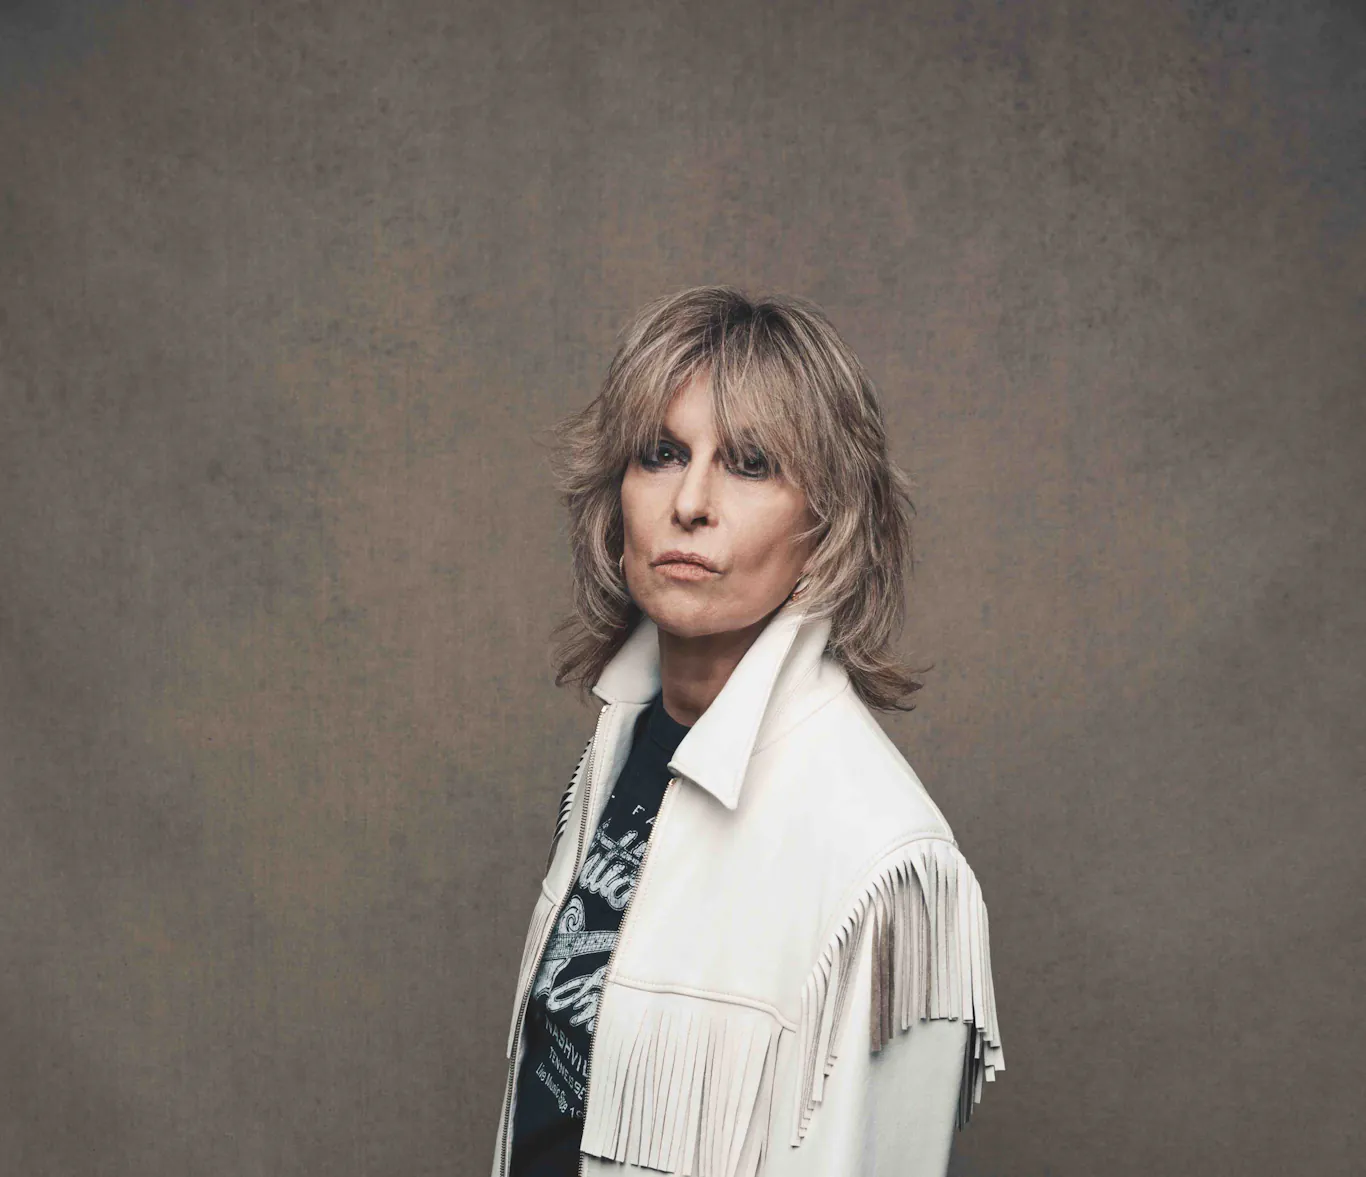 PRETENDERS announce headline show at Limelight 1 on 23rd May 2023